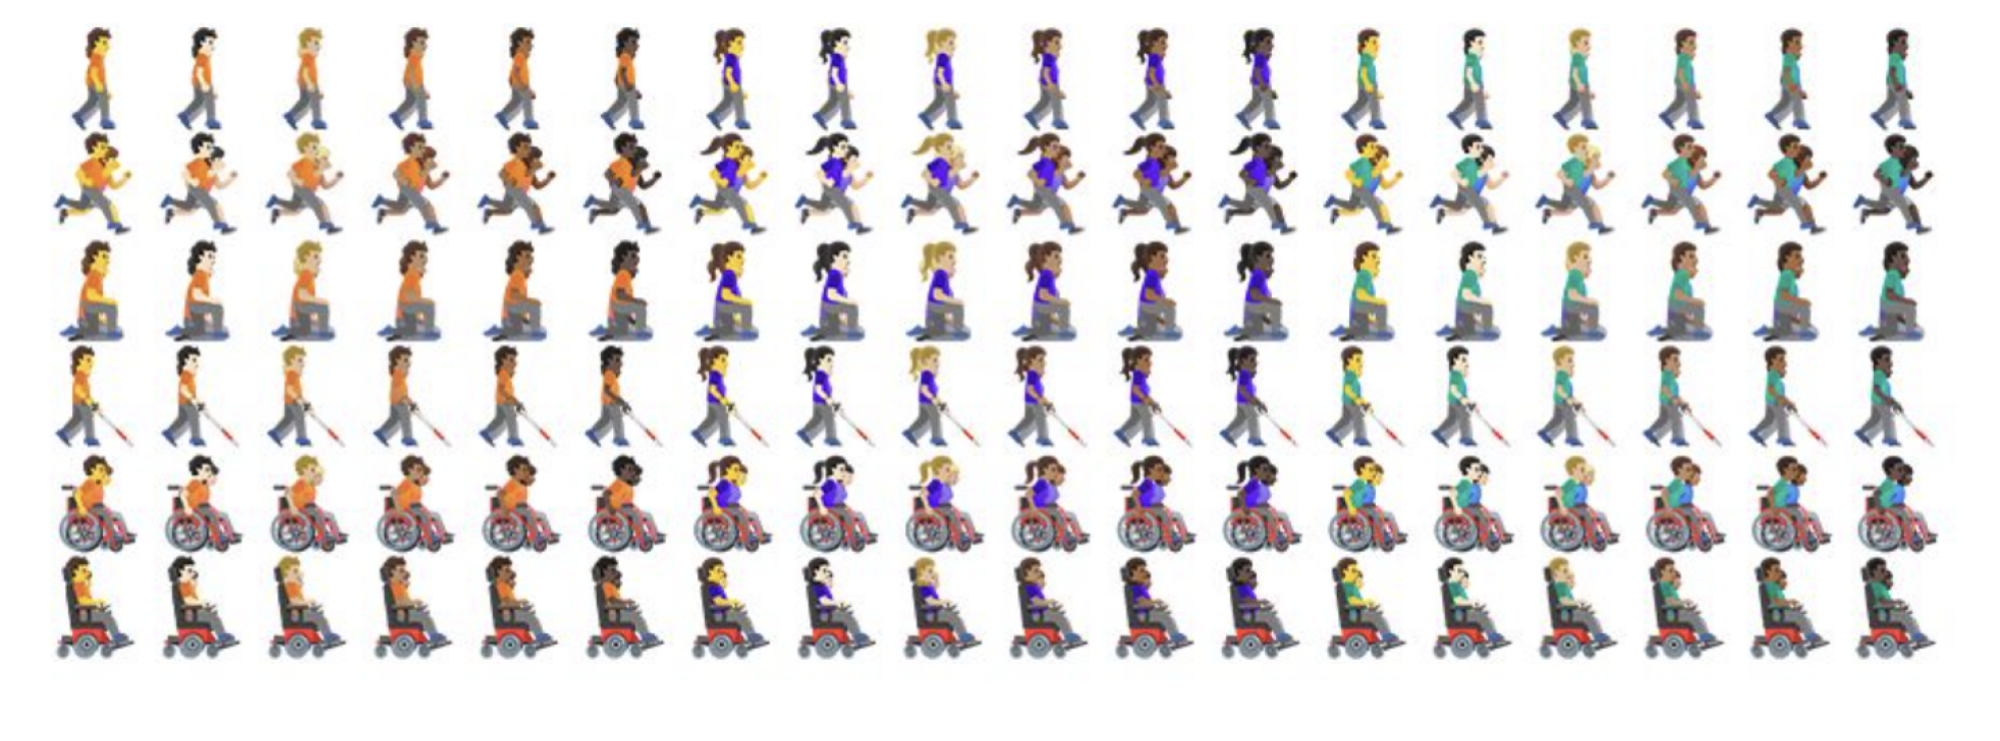 several variations of the walking, running, kneeling, cane, wheelchair, and motorized wheelchair emojis all facing to the right